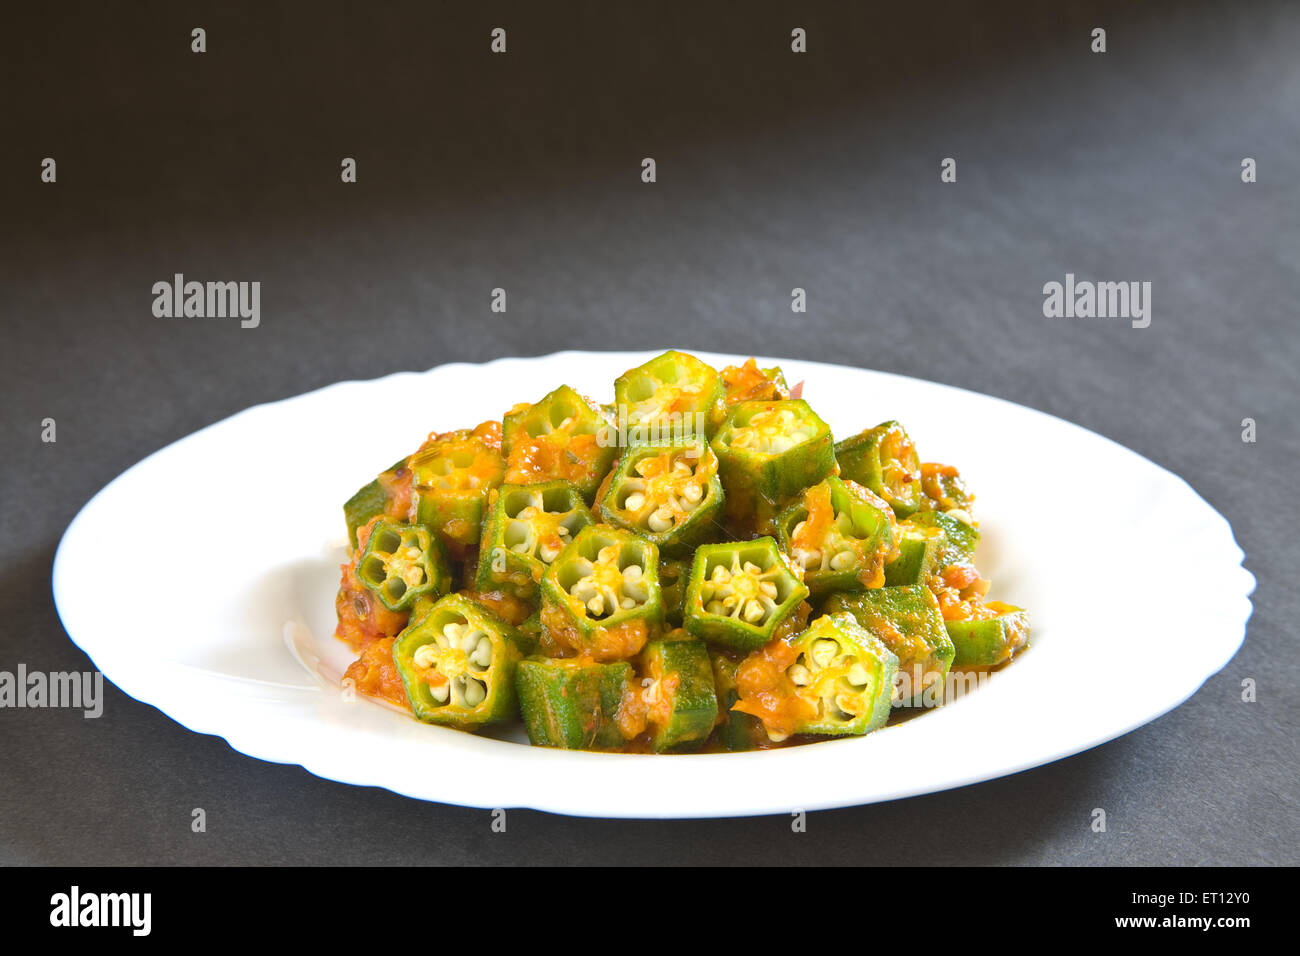 Indian cuisine masala lady finger okra hibiscus esculentus served in plate on black background 17 May 2010 Stock Photo